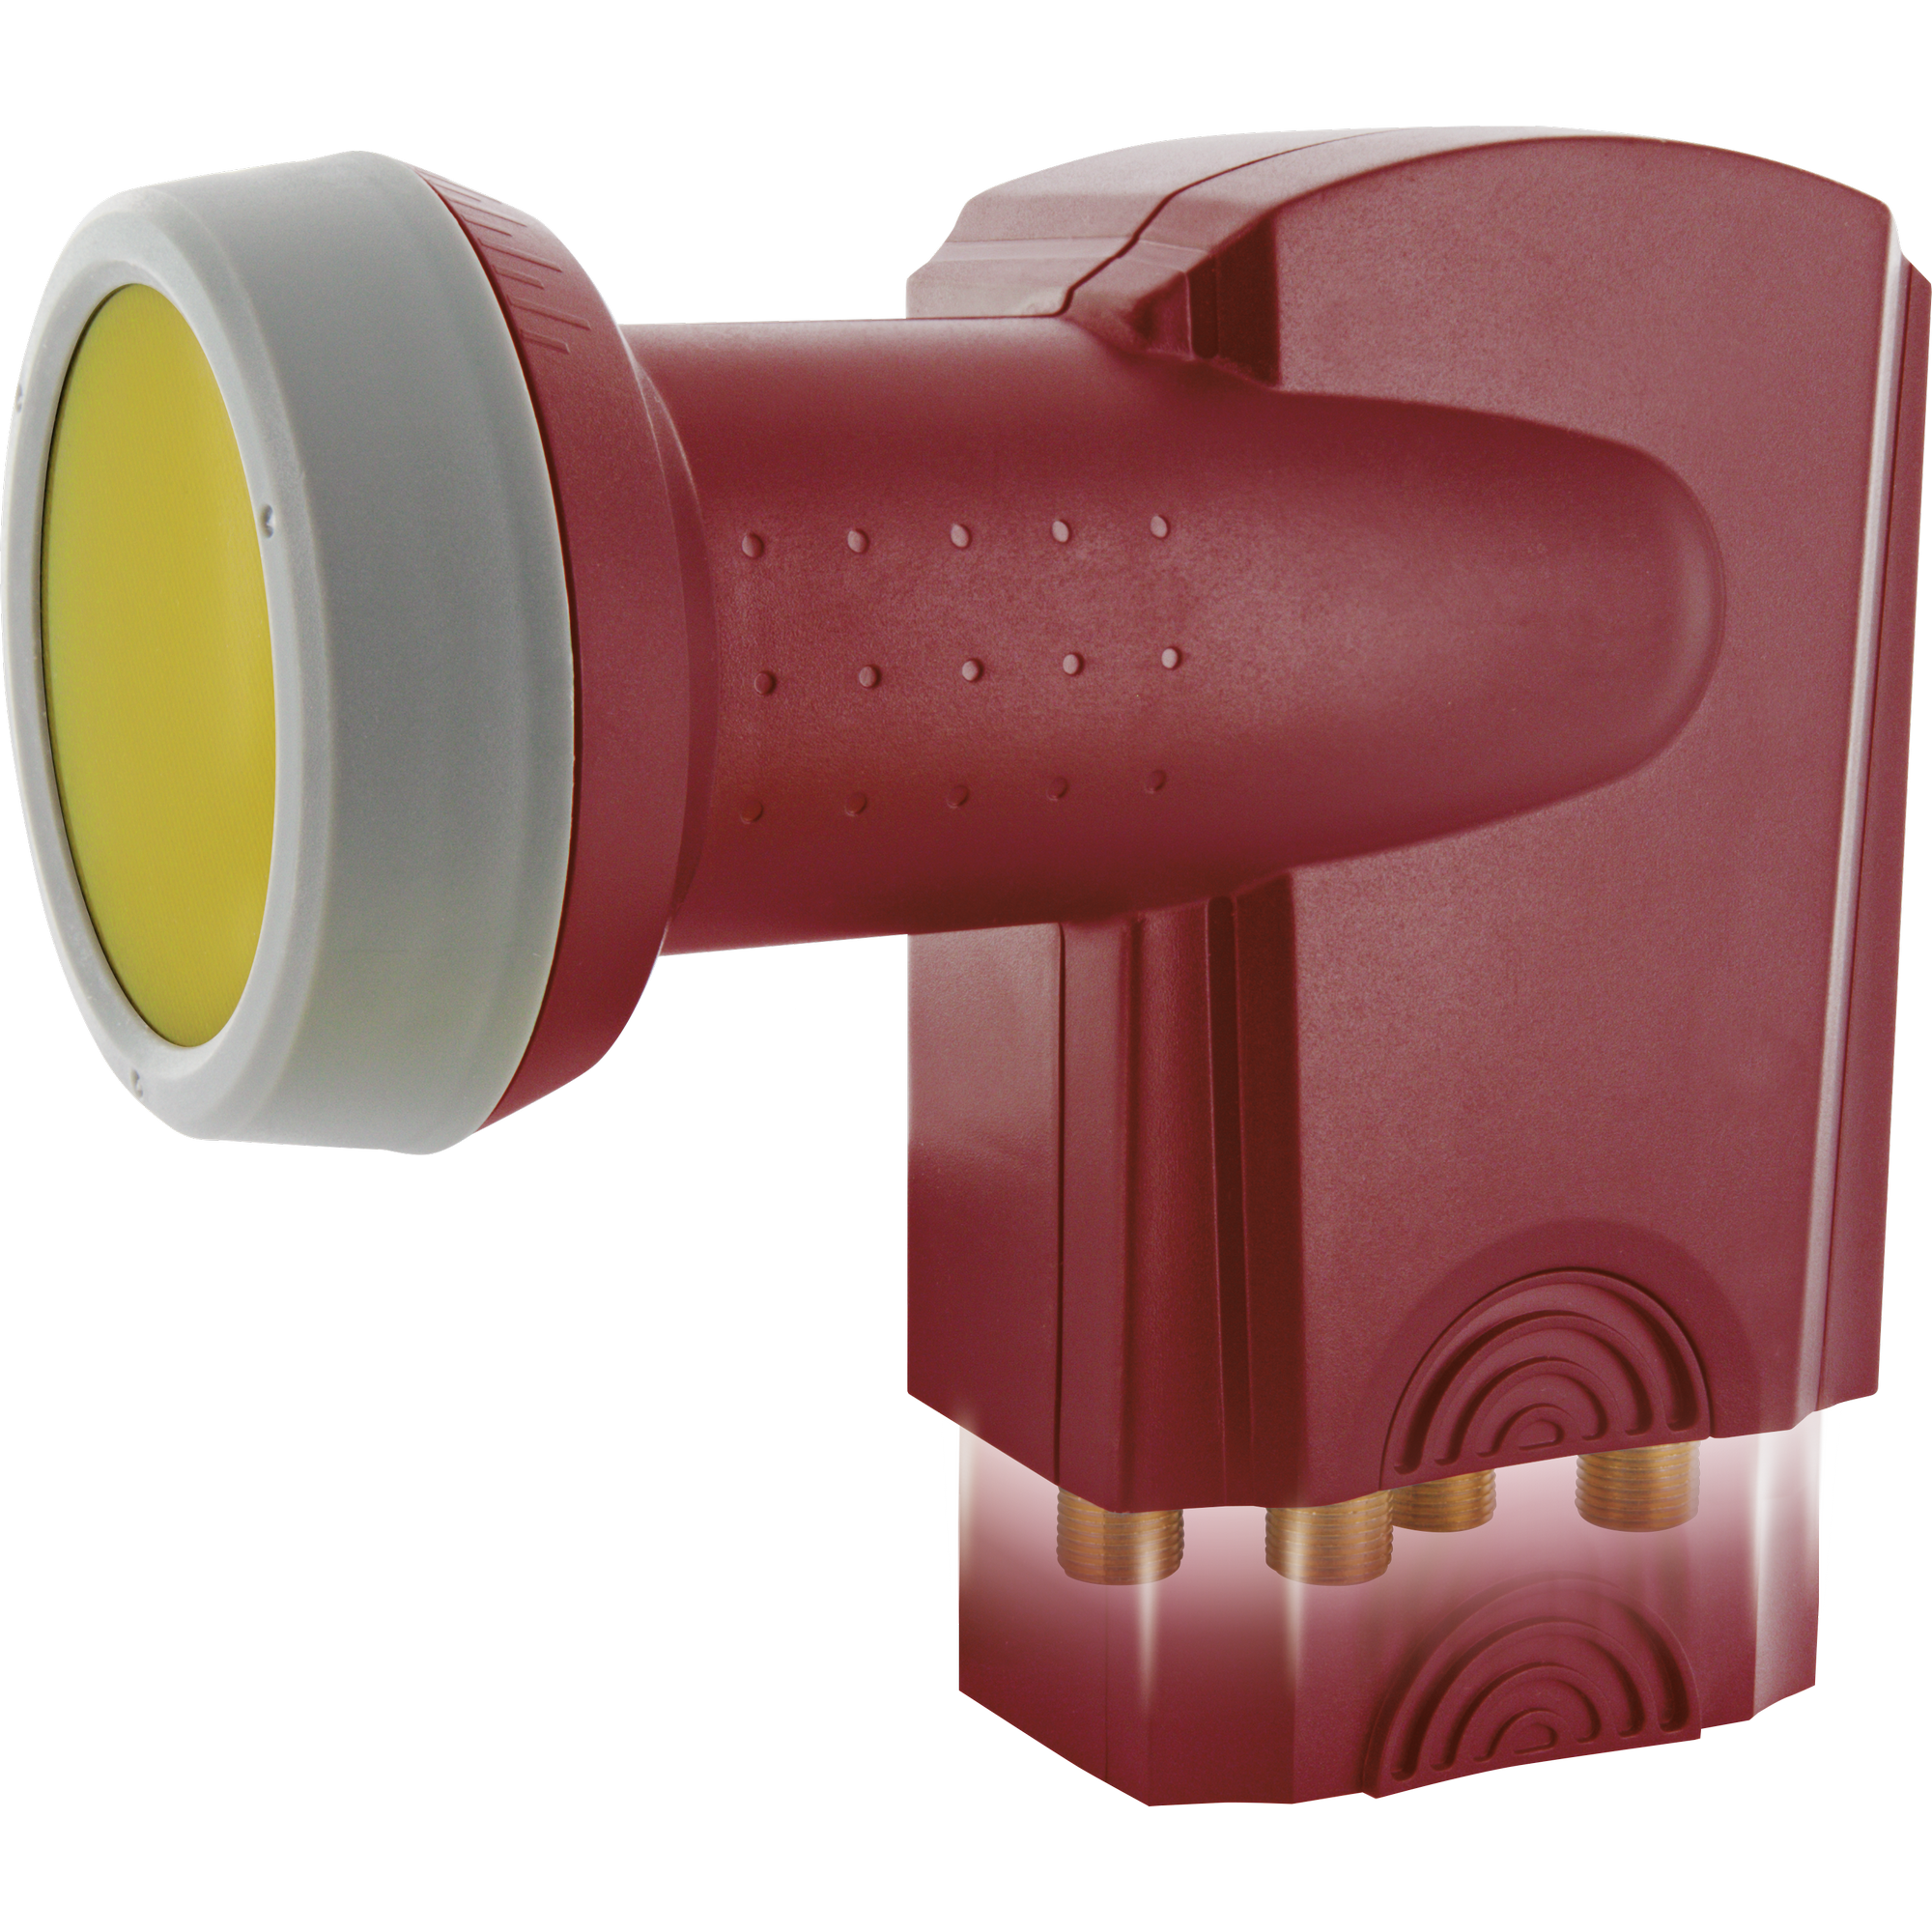 Digitales Quad LNB 'Sun Protect' ziegelrot + product picture